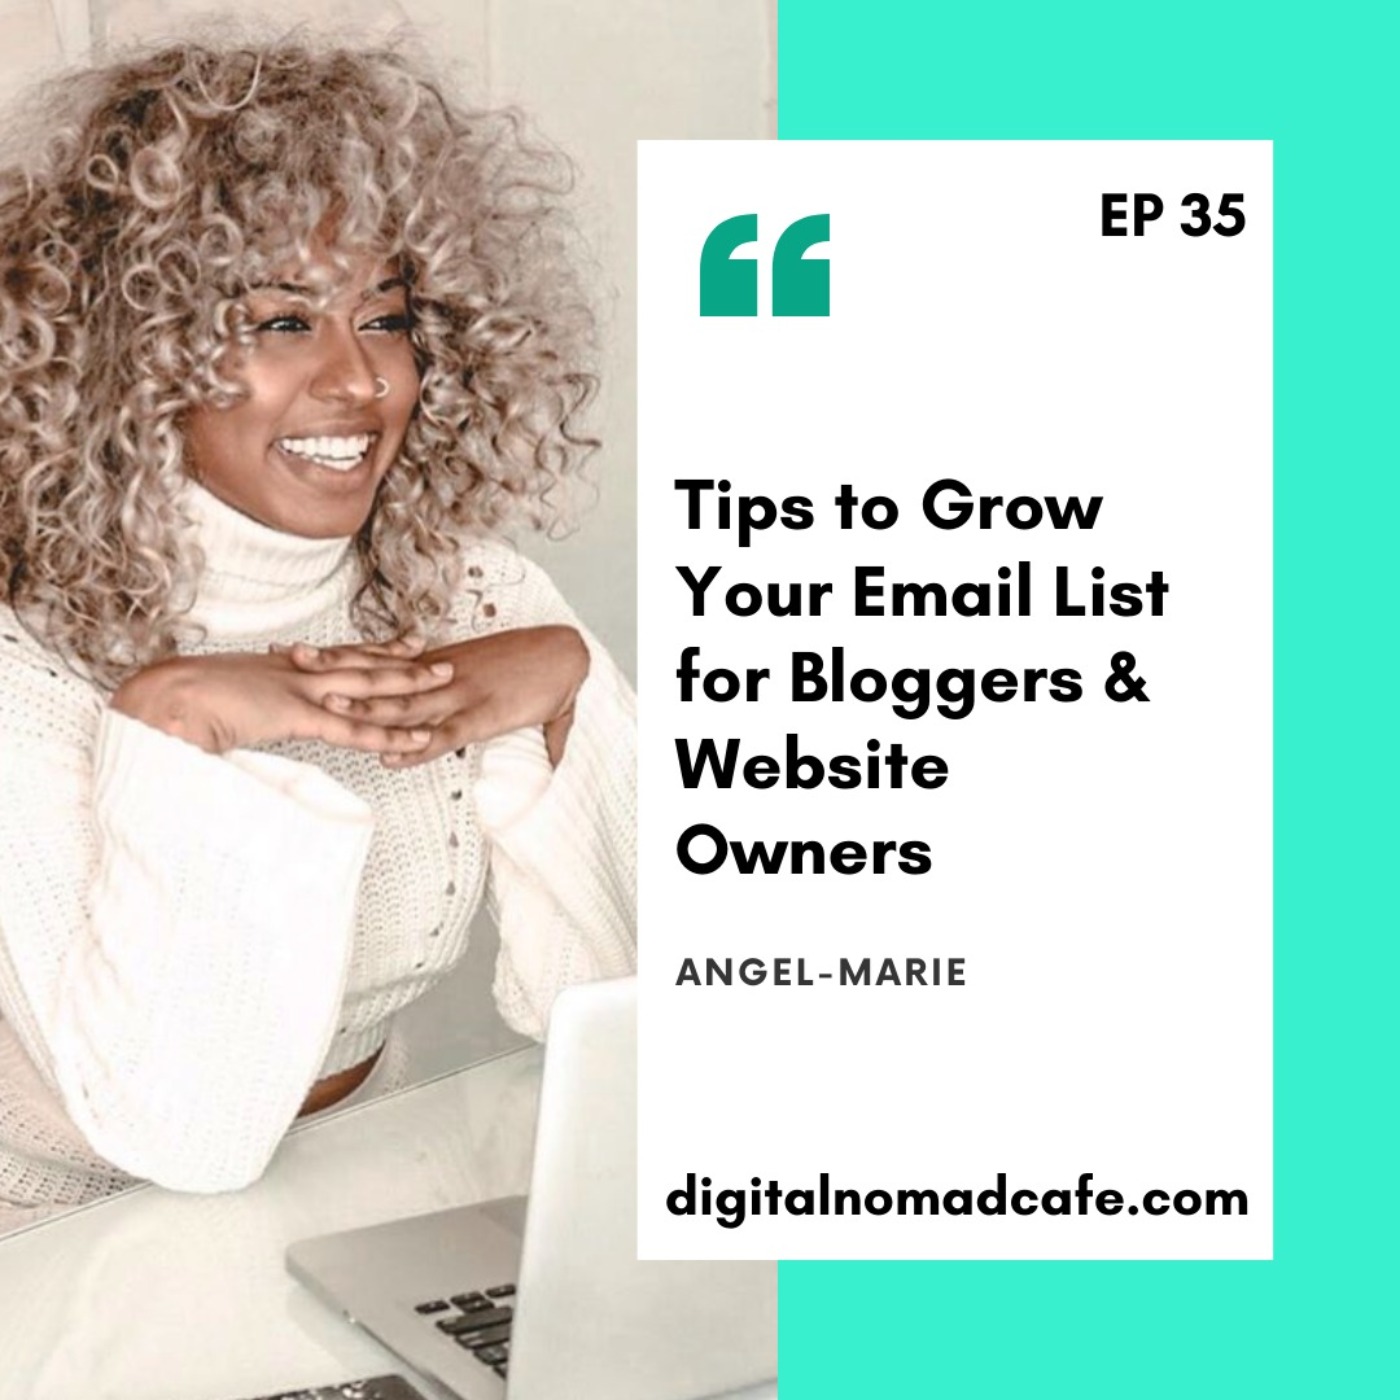 EP35: Tips to Grow Your Email List with Angel-Marie from Convertkit